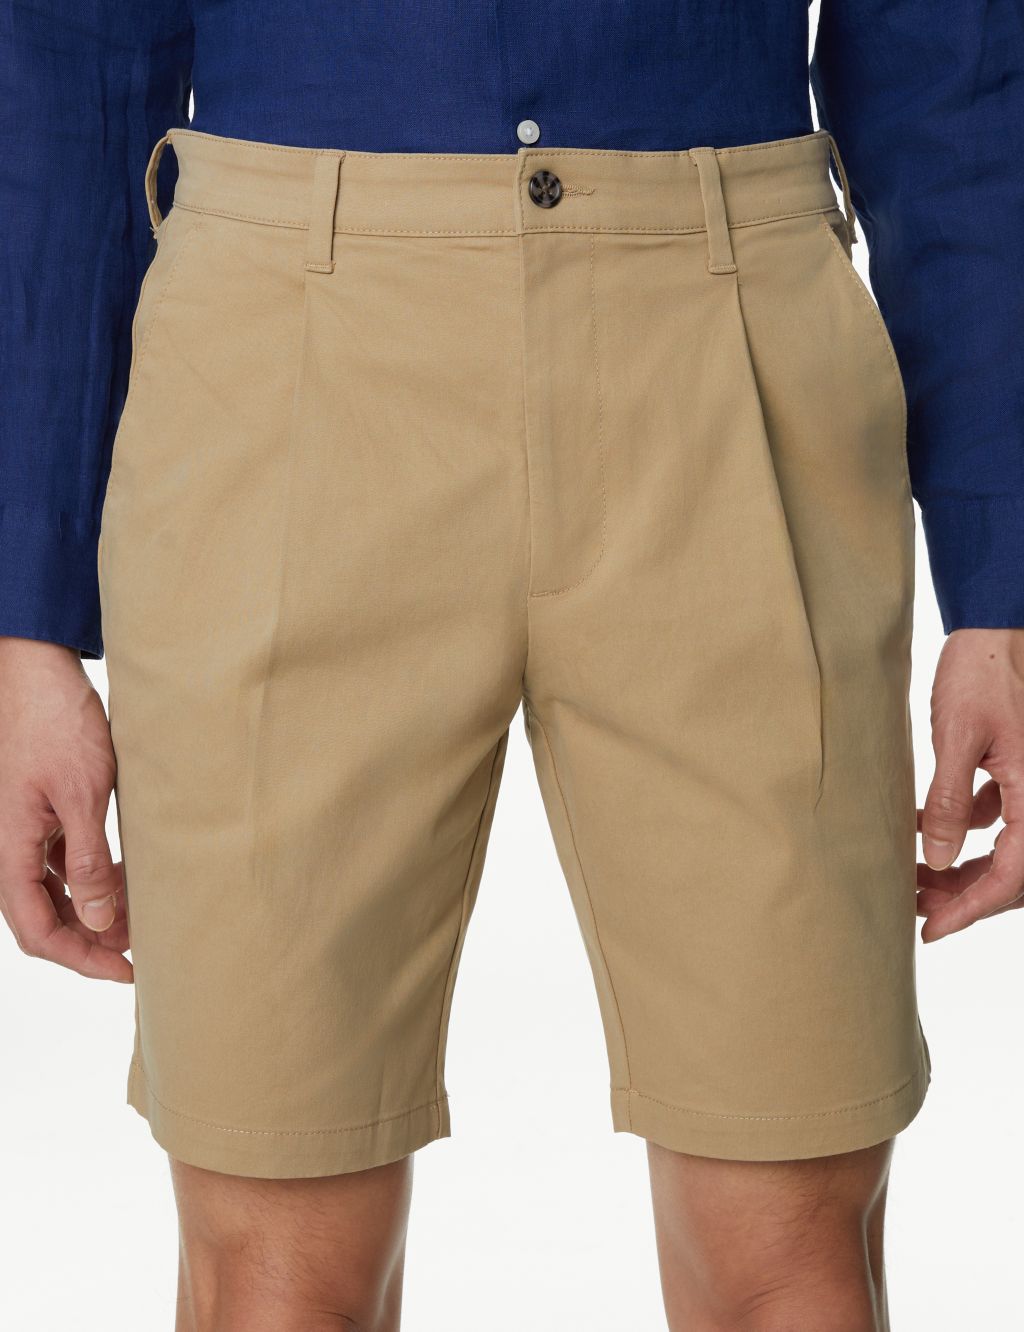 Men's Everyday Shorts, C Patch, 9